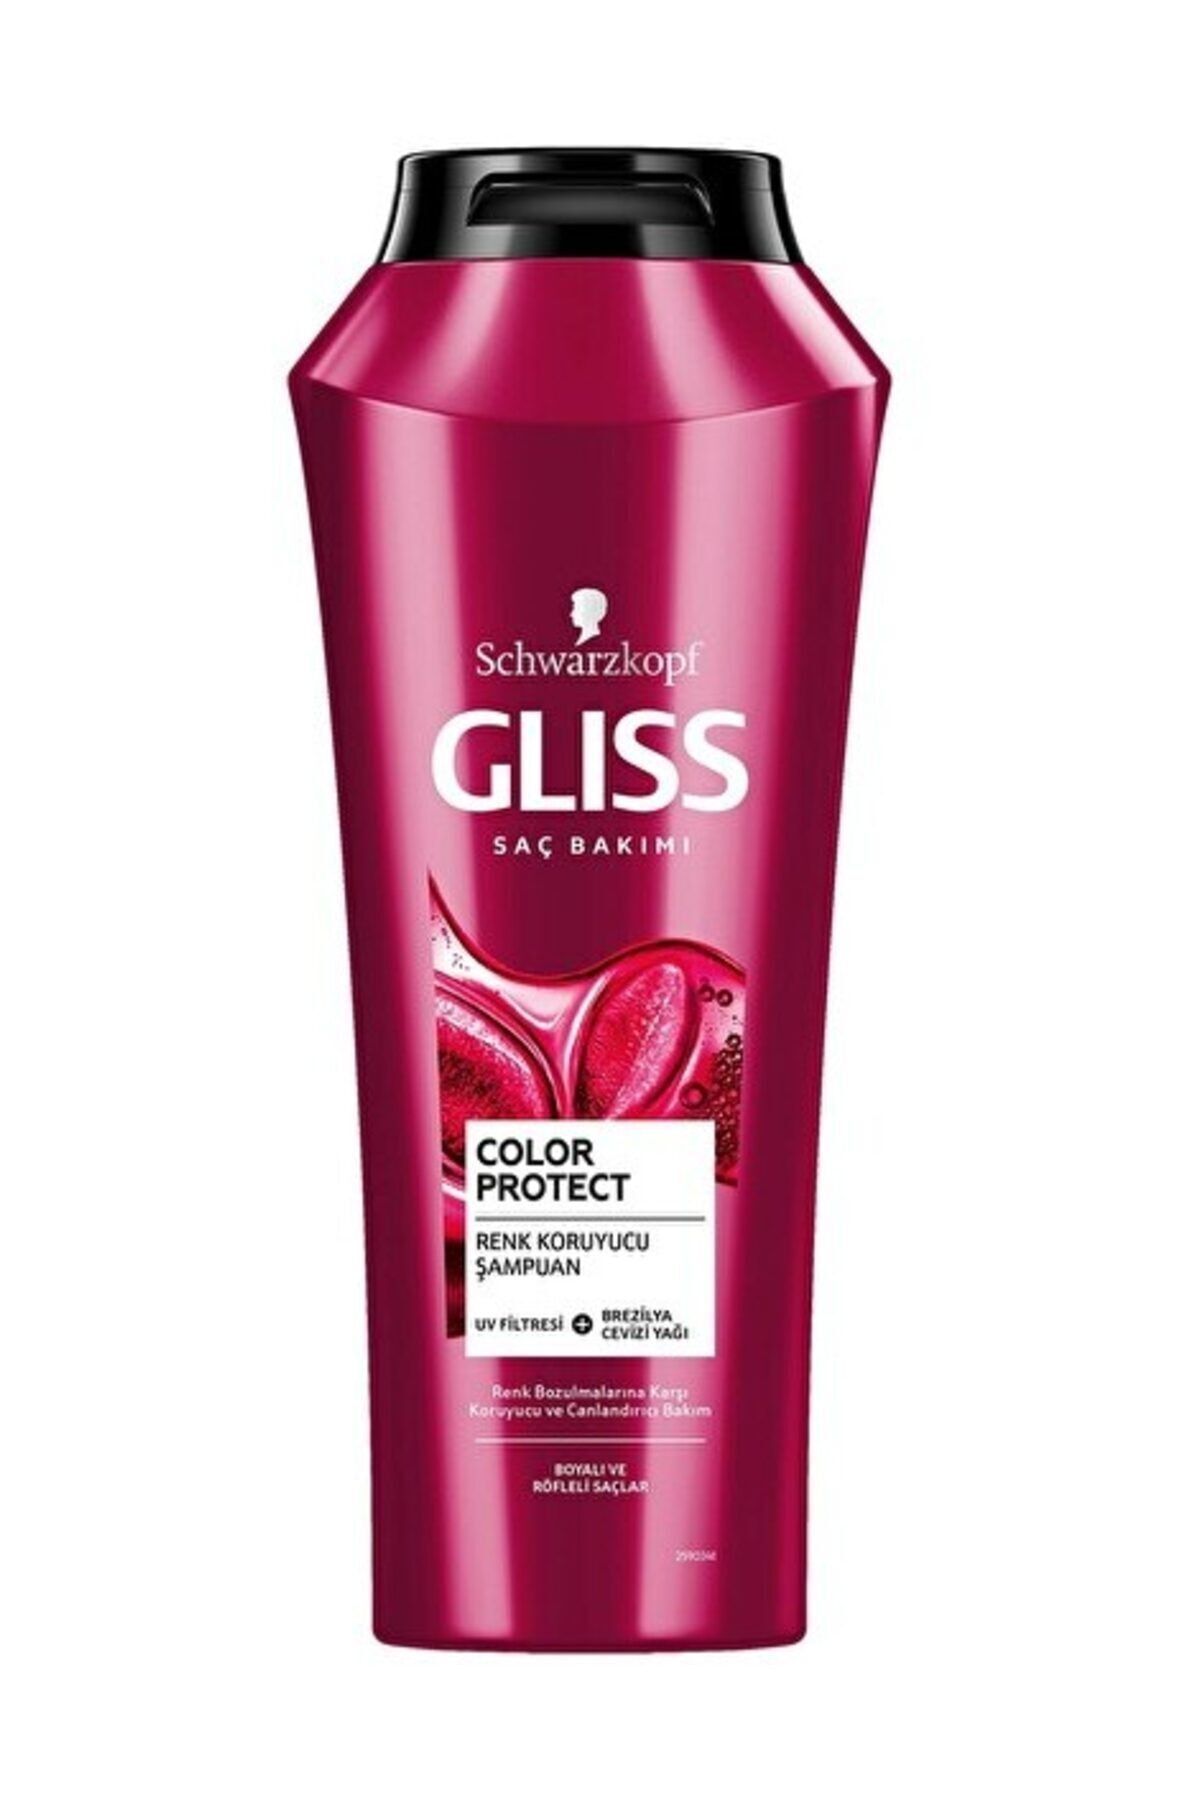 Gliss Color Protect Şampuan 500 Ml